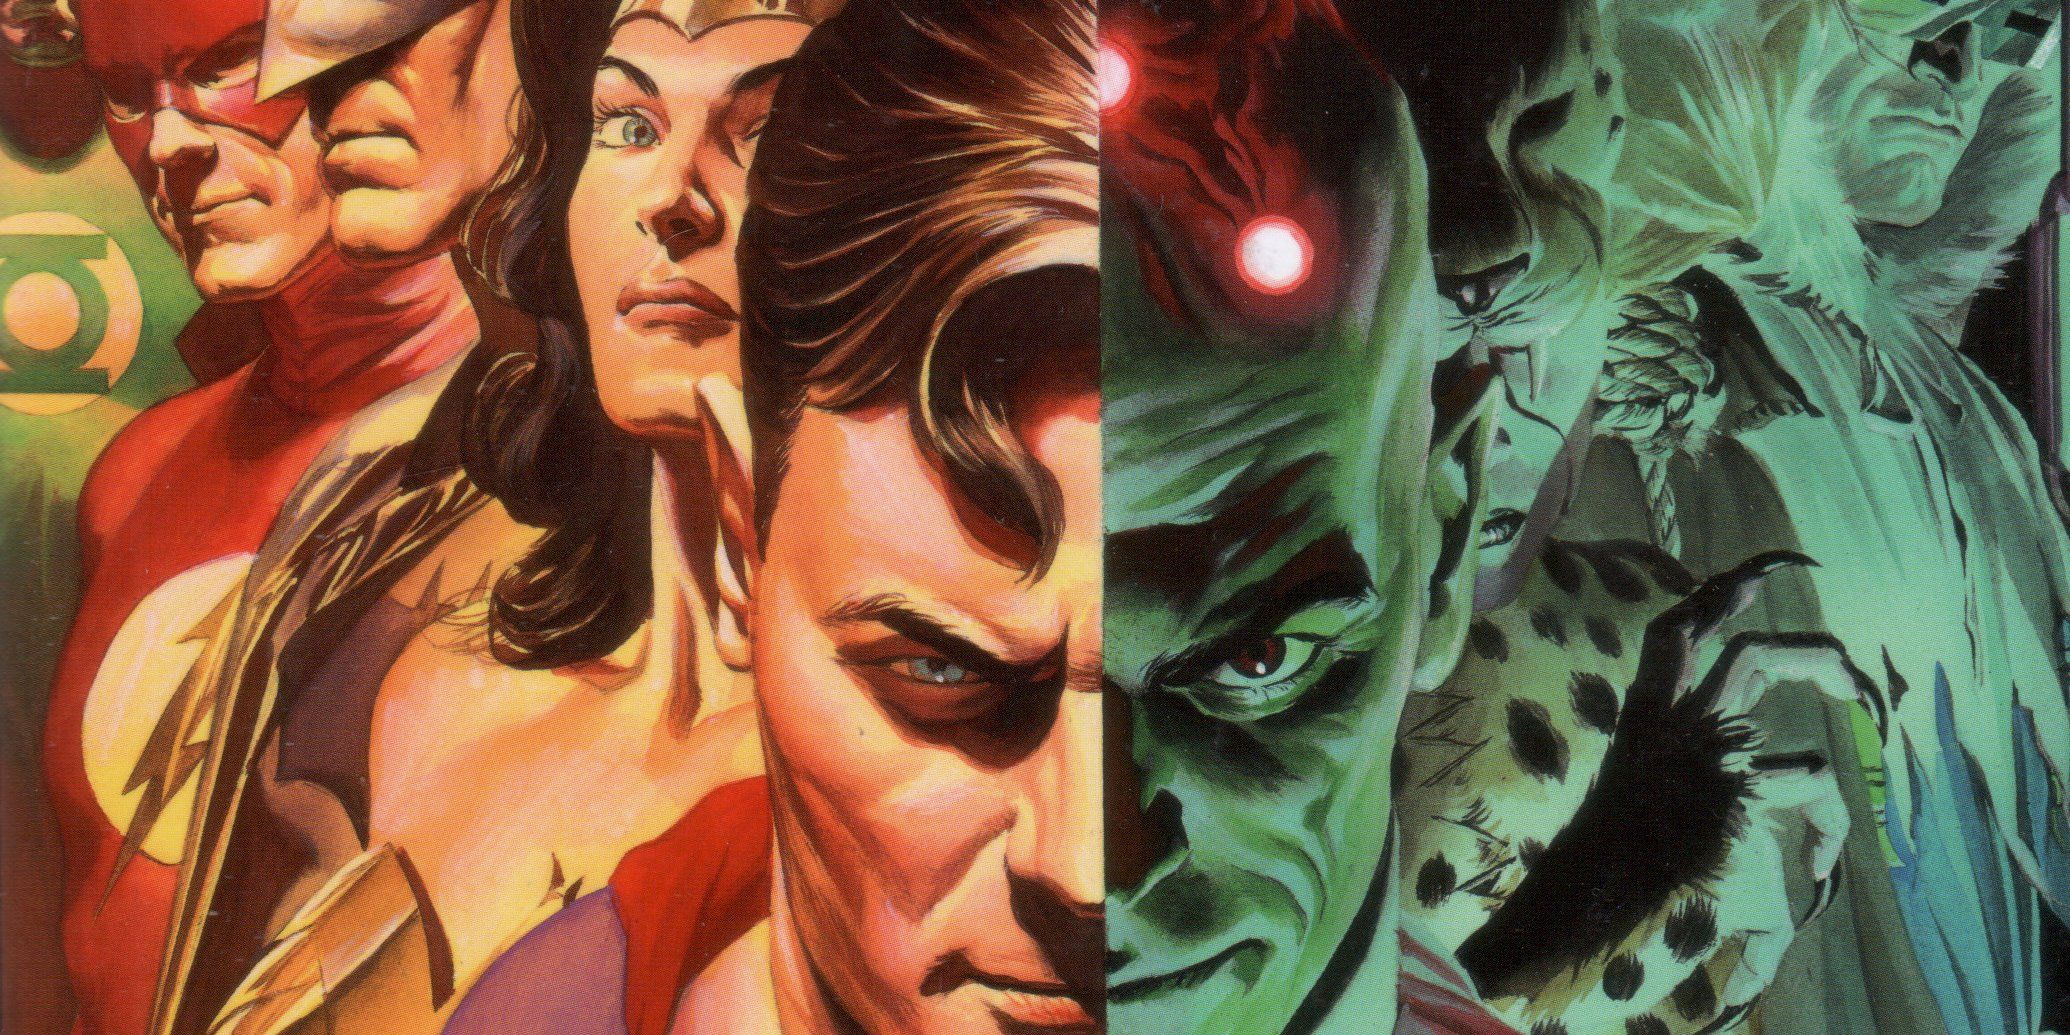 Superman leads the Justice League against Brainiac and the Legion of Doom